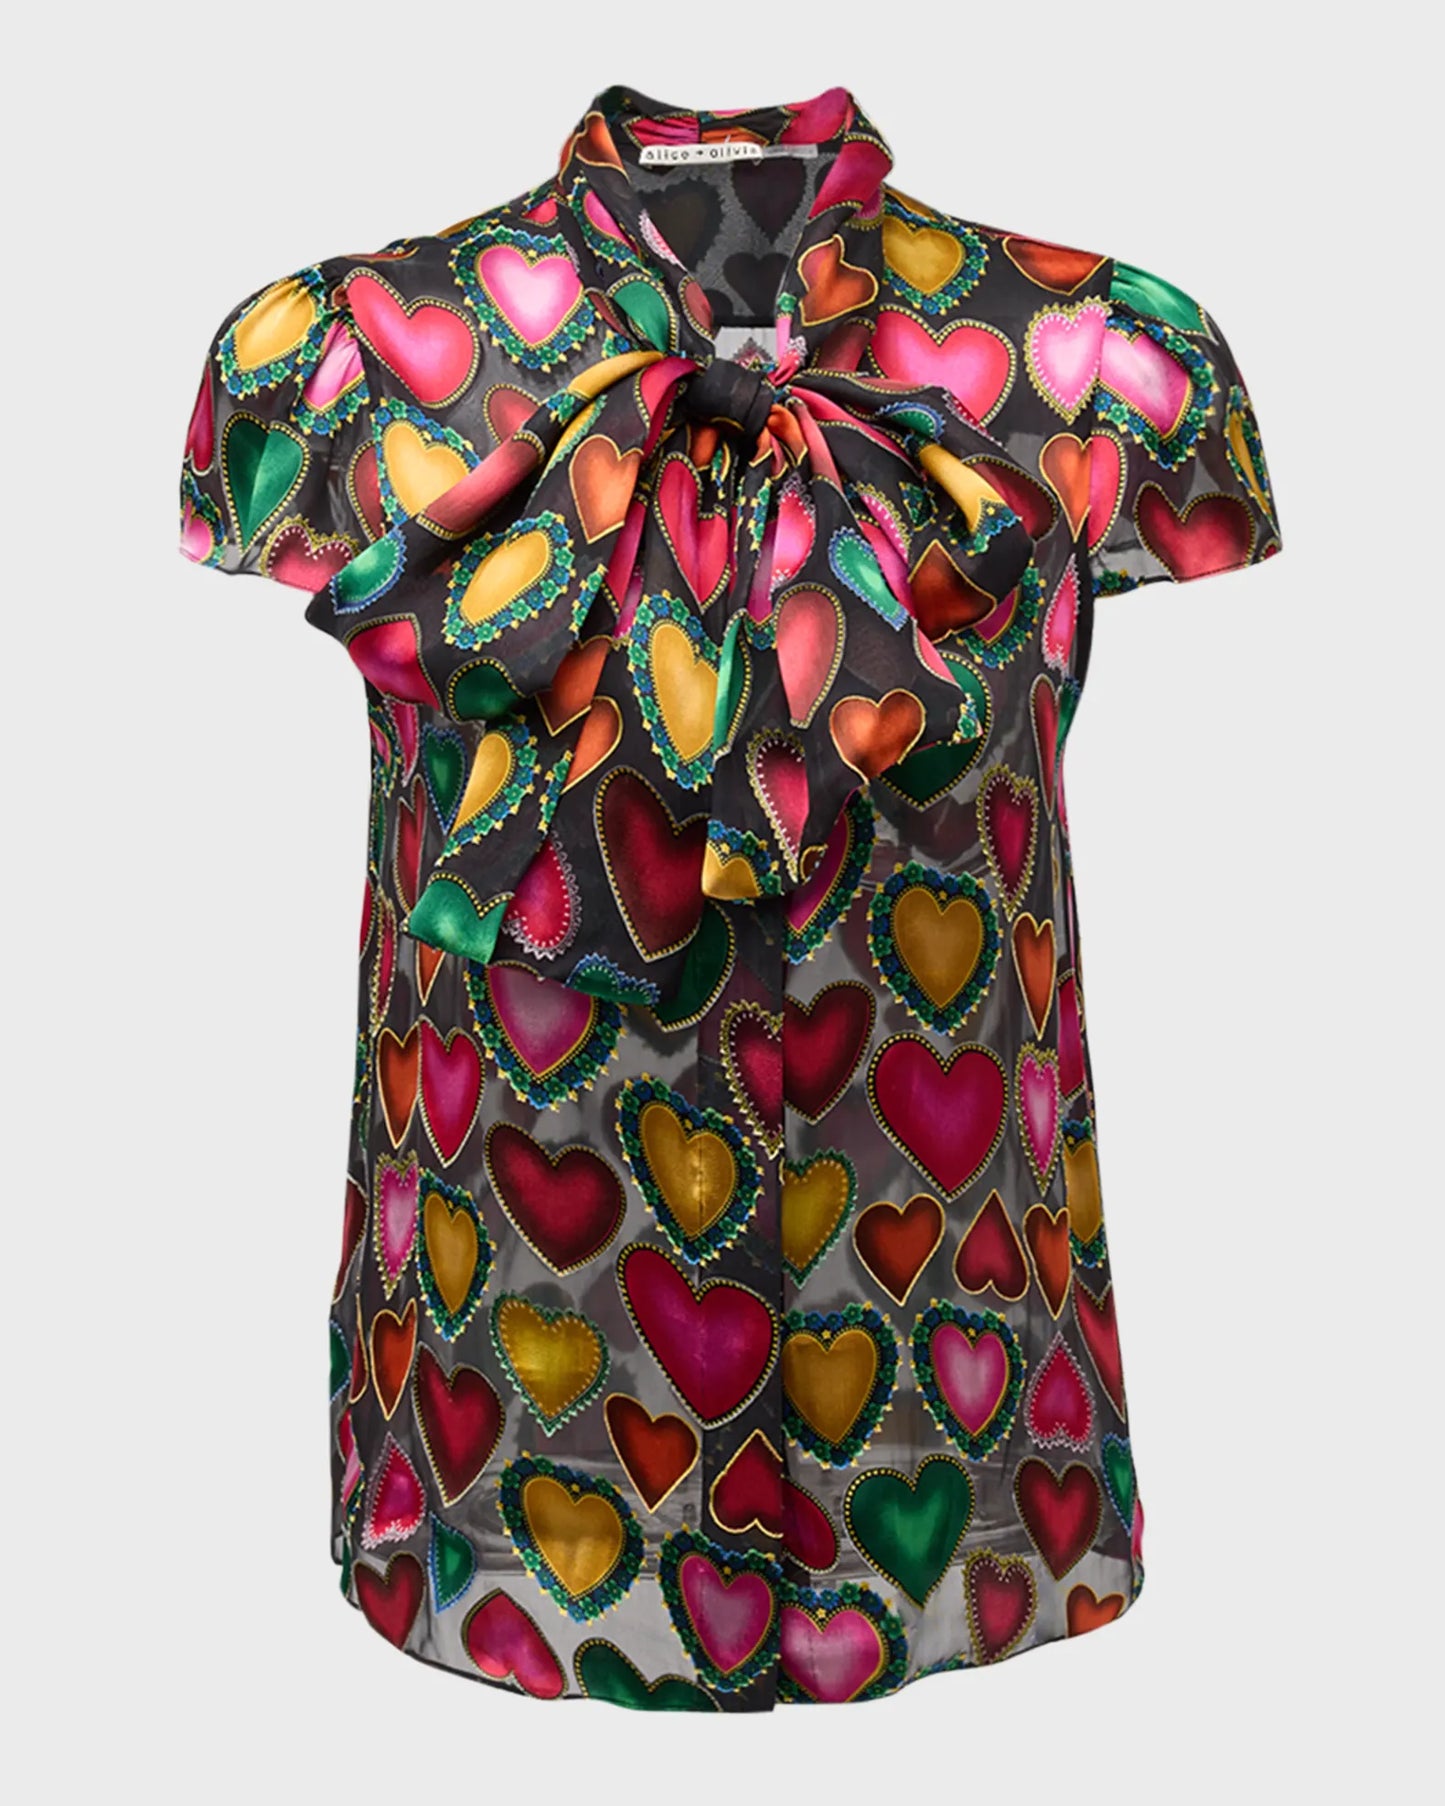 Jeannie Bow Blouse Love Ease - Alice + Olivia